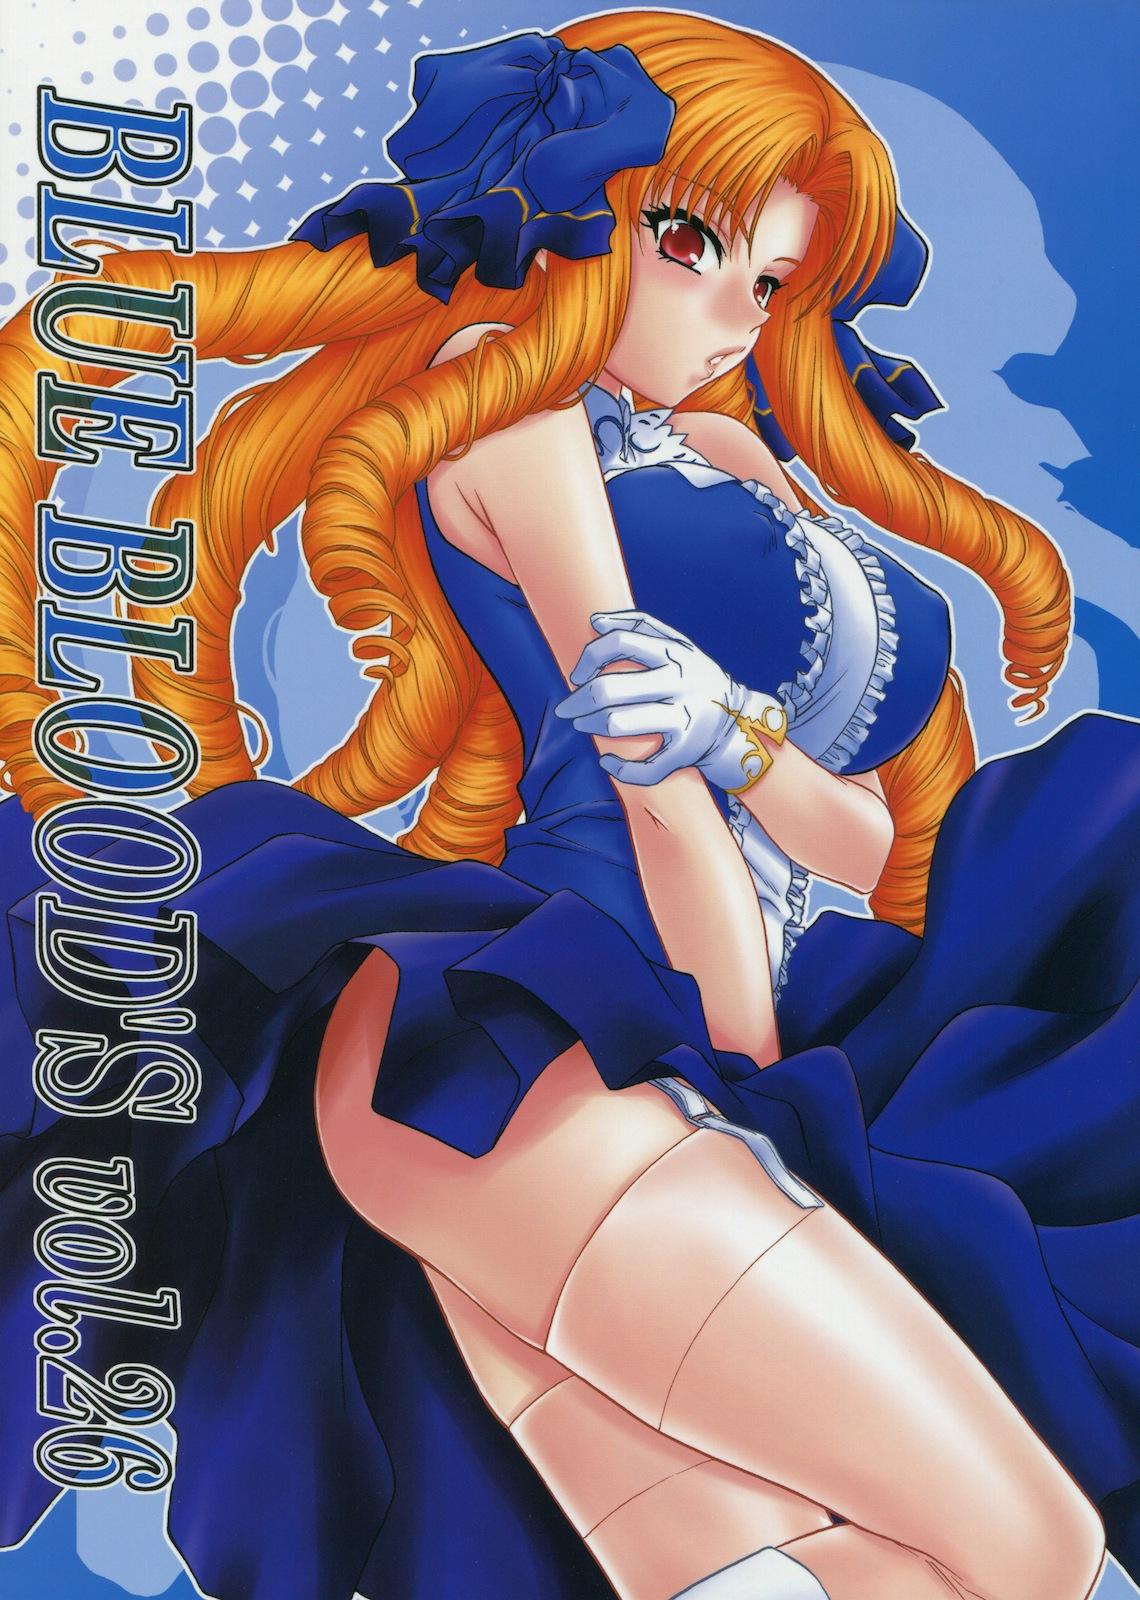 Soapy BLUE BLOOD'S vol.26 - Fate hollow ataraxia Metendo - Page 2